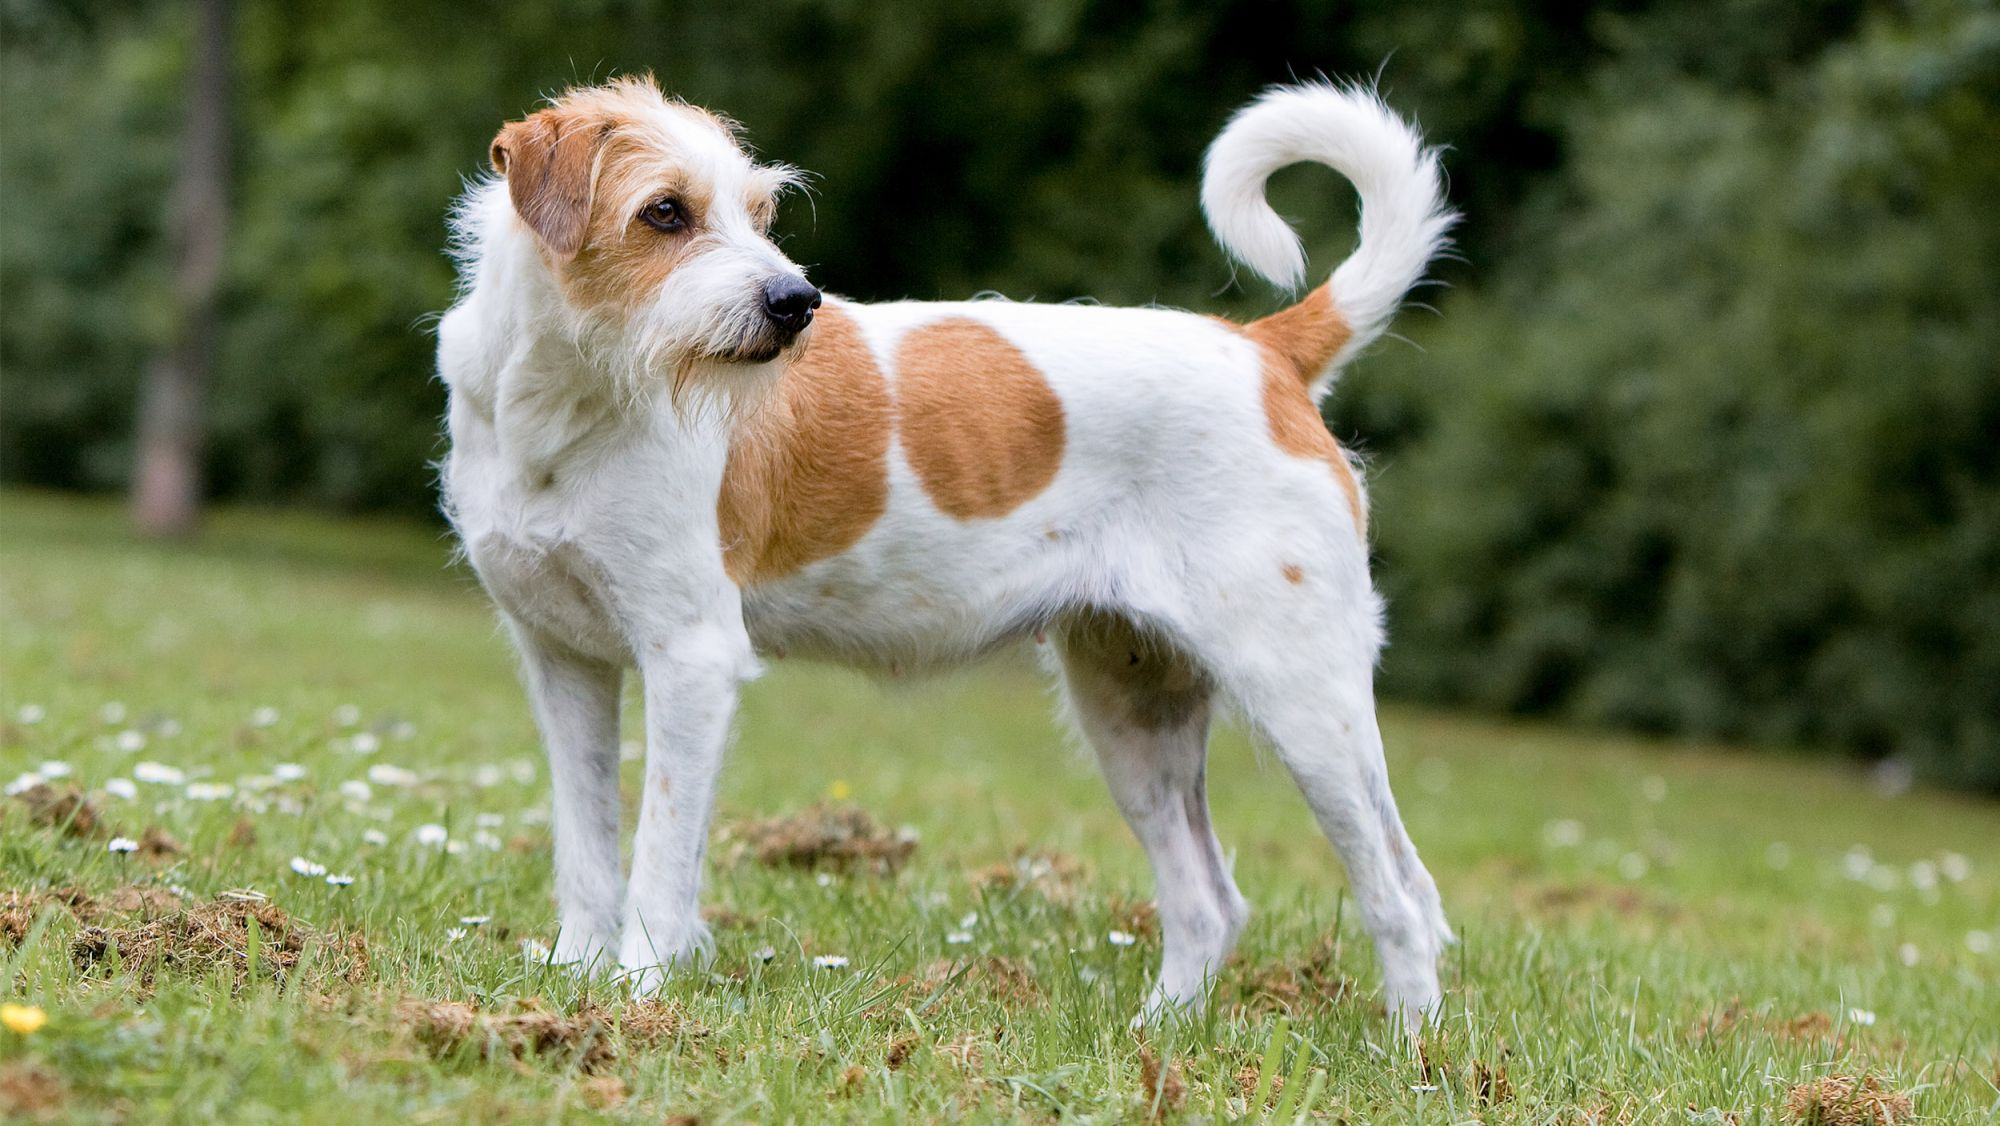 Jack Russell Terrier adult standing outdoors on grass